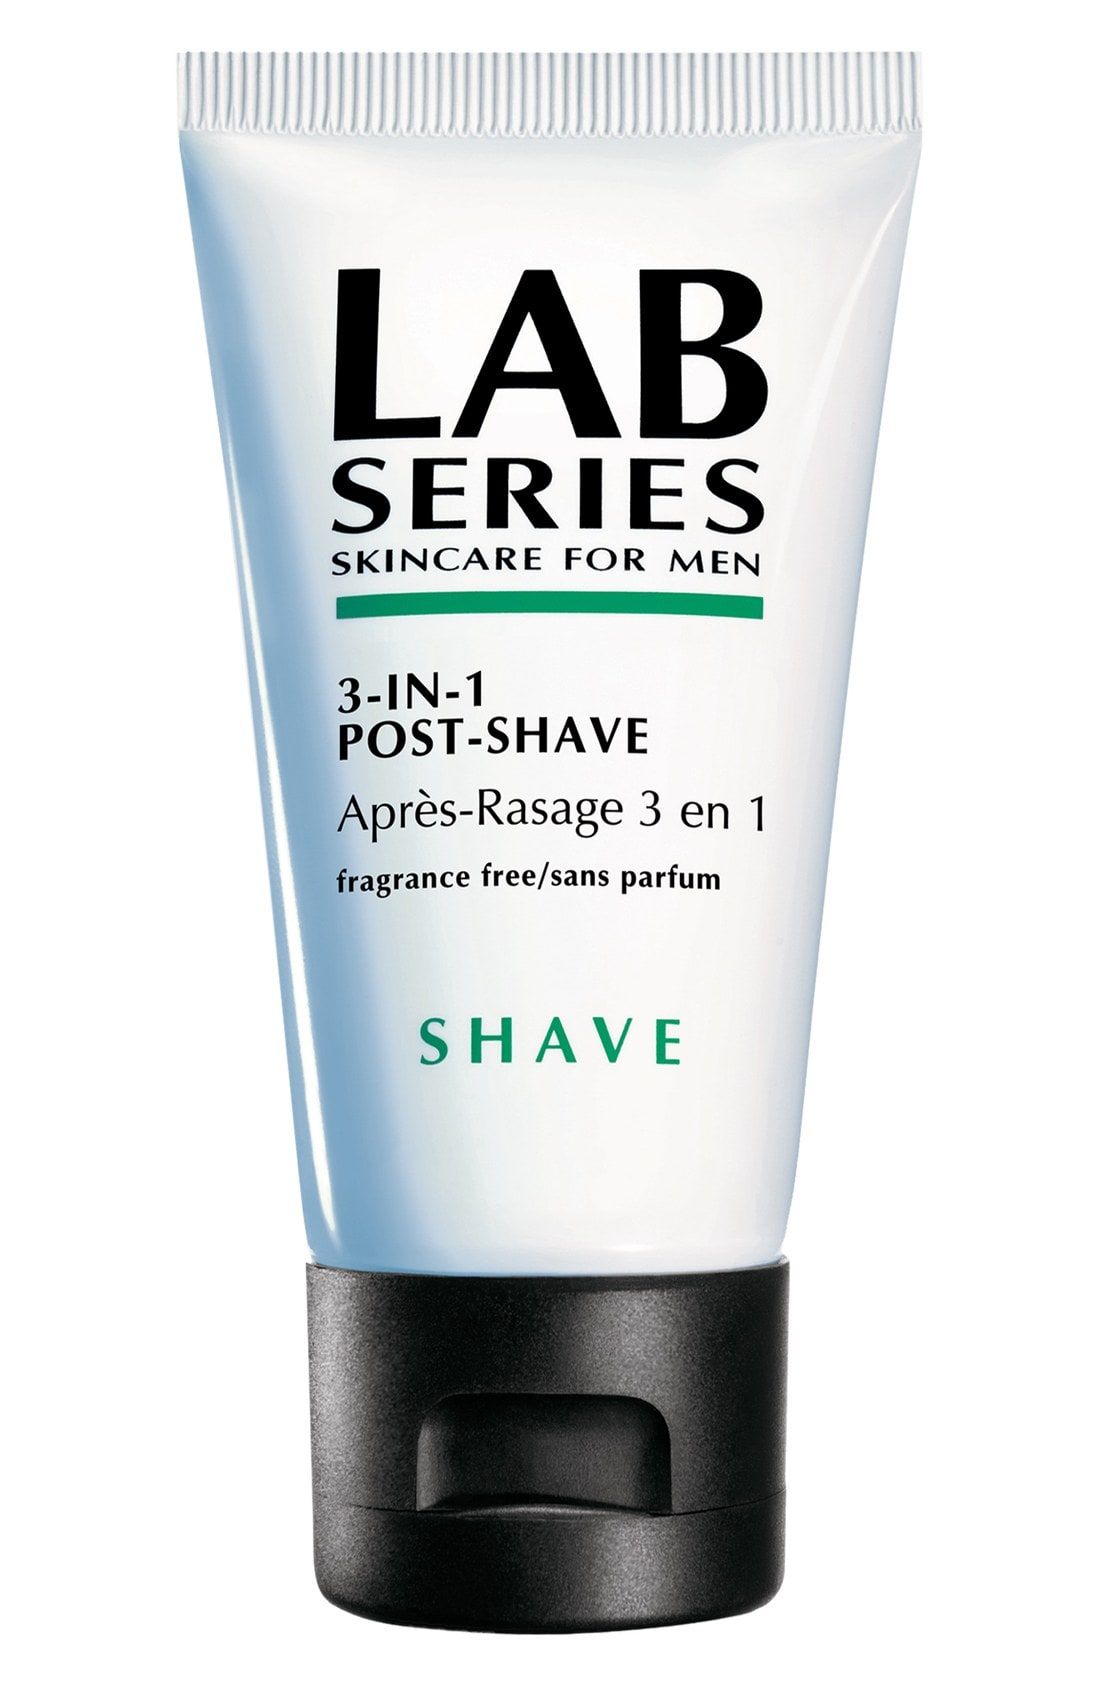 LAB SERIES 3-In-1 Post-Shave